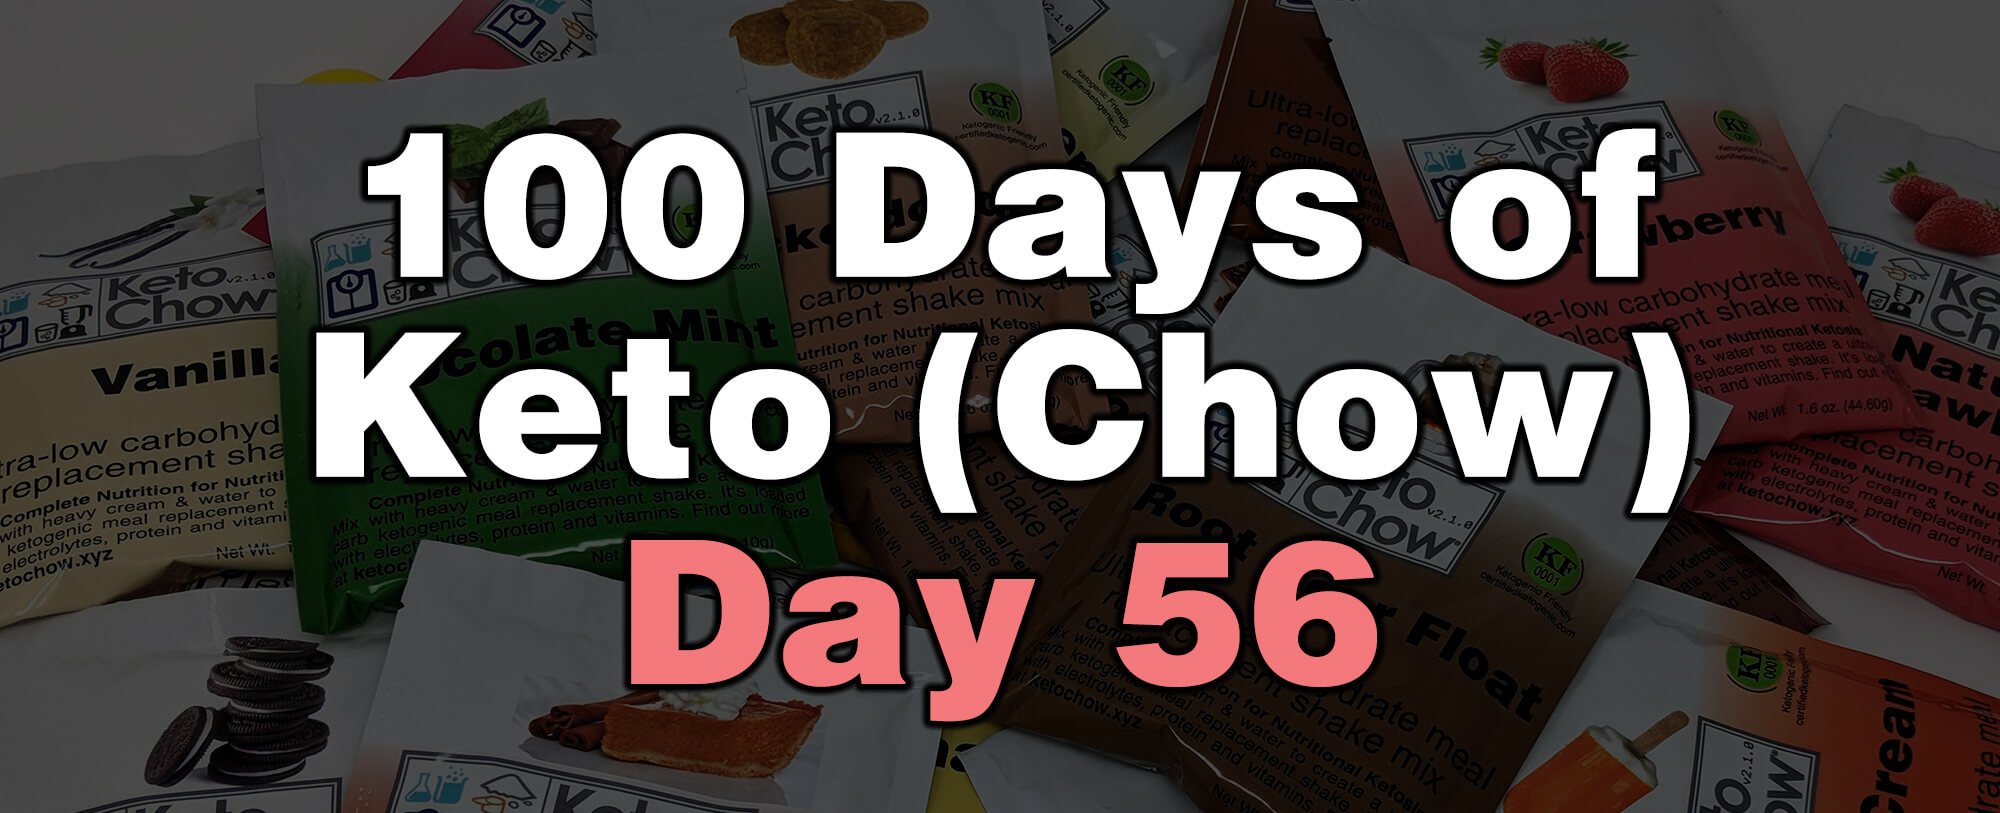 100 days of keto chow day 56